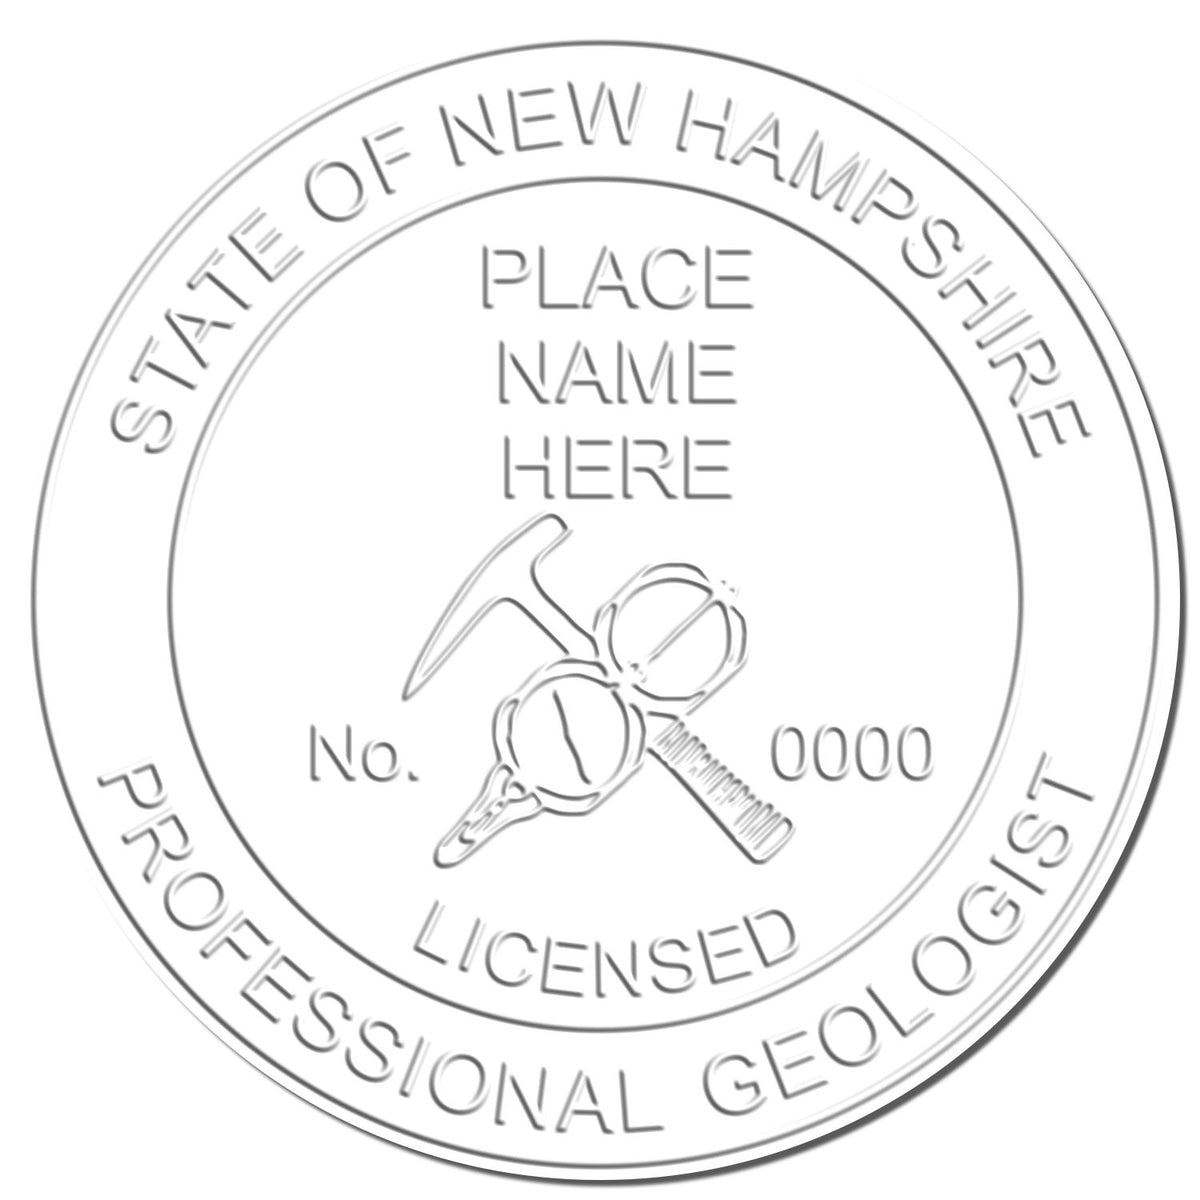 The New Hampshire Geologist Desk Seal stamp impression comes to life with a crisp, detailed image stamped on paper - showcasing true professional quality.